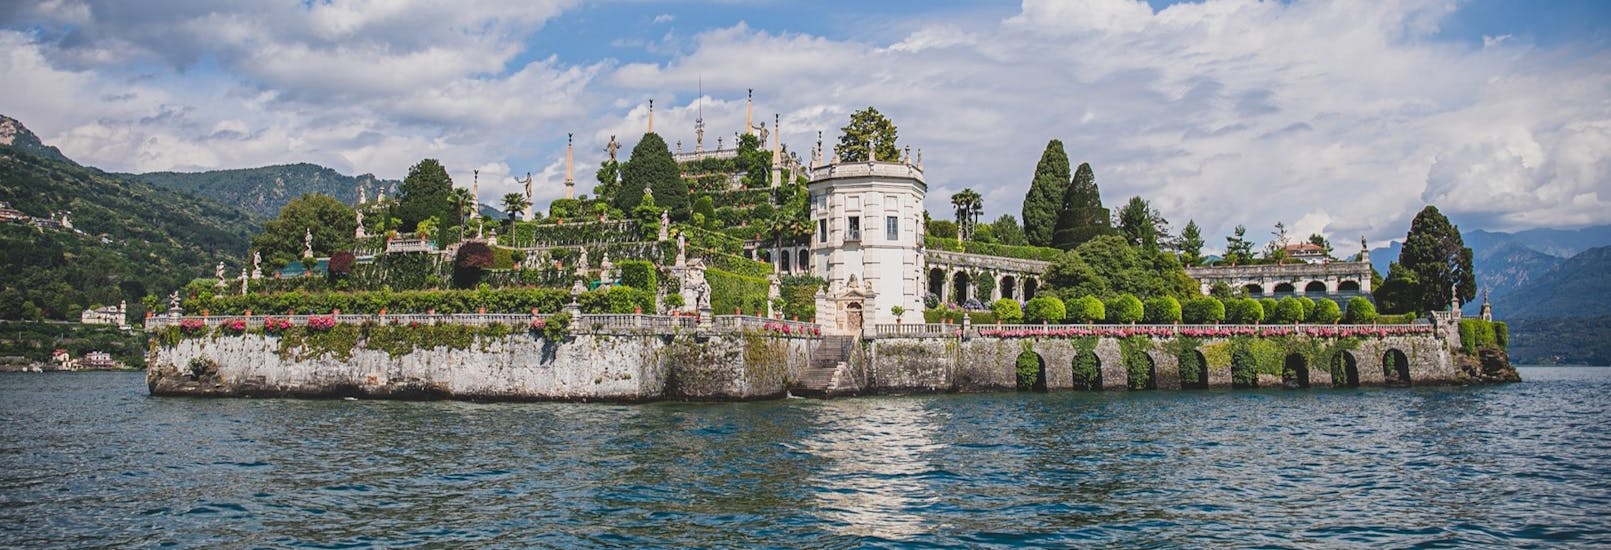 View of the gardens of Isola Bella during the Boat Transfer from Baveno to Isola Madre, Isola Bella and Isola dei Pescatori with Summer Boats Baveno.